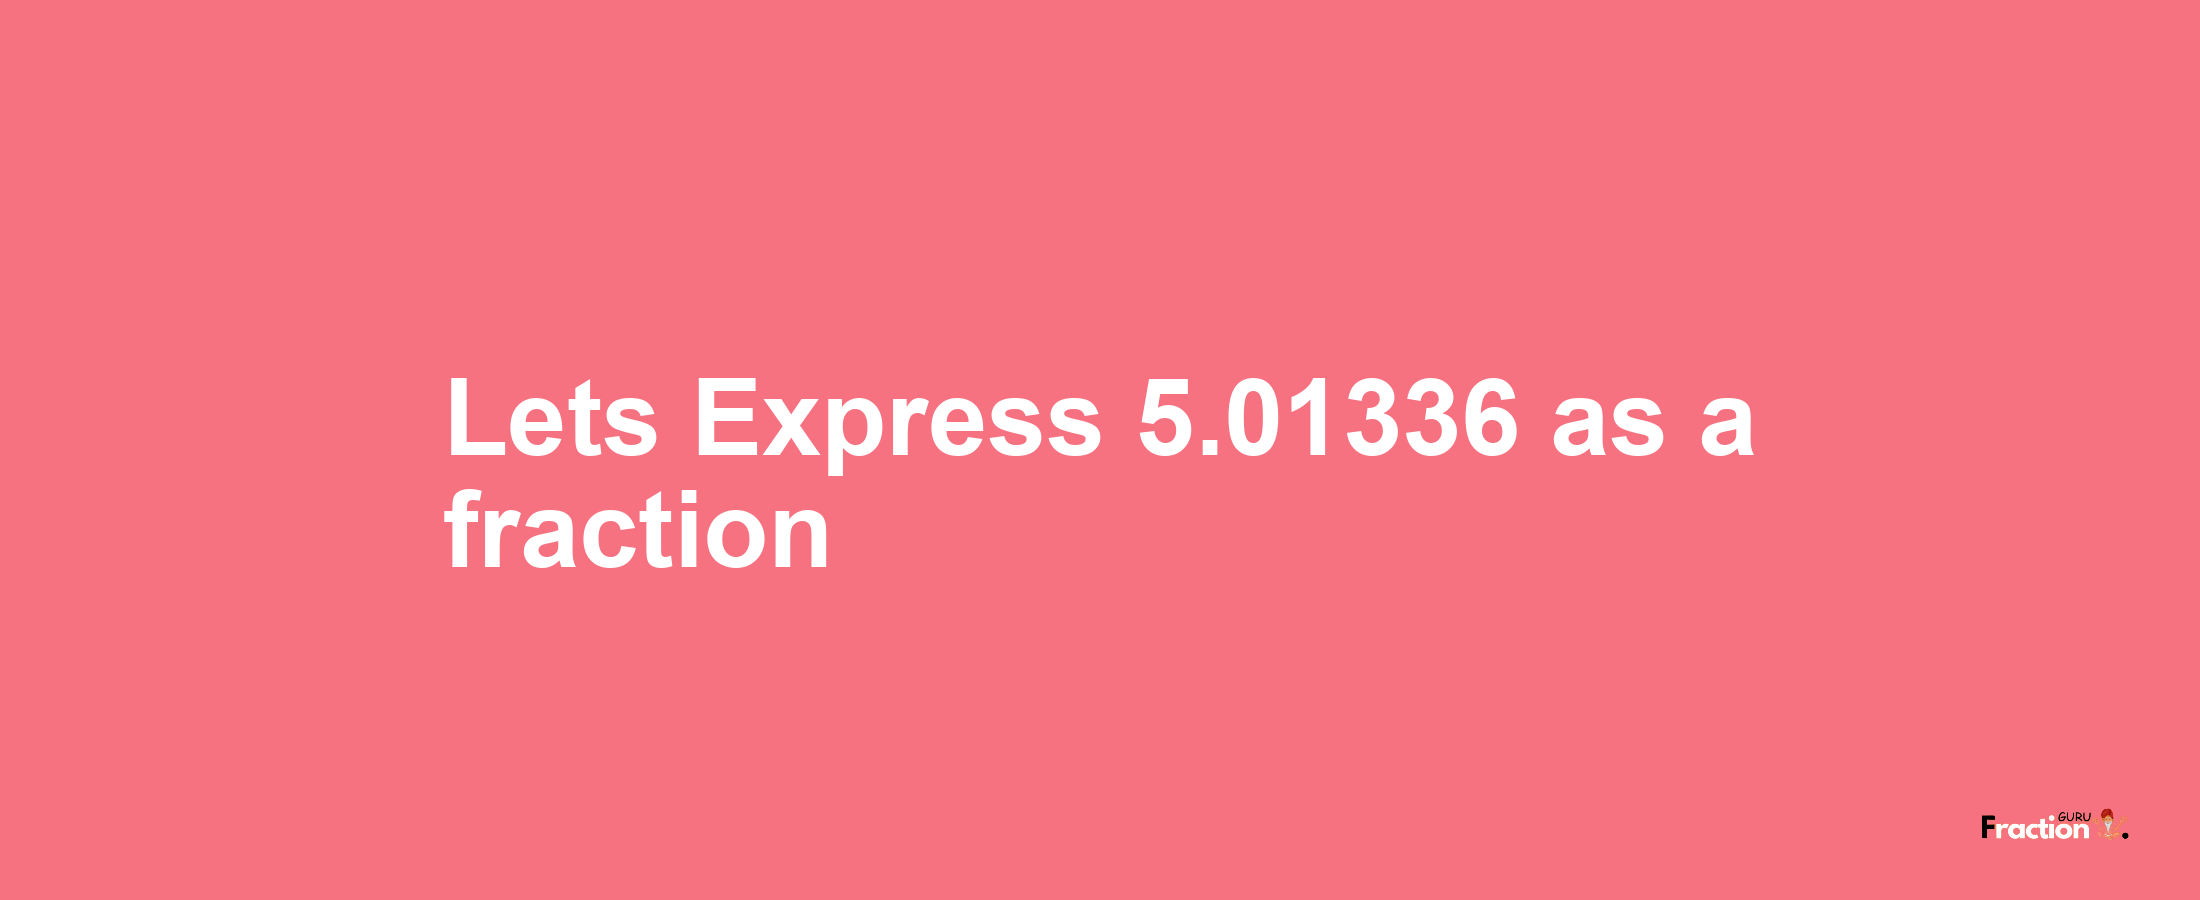 Lets Express 5.01336 as afraction